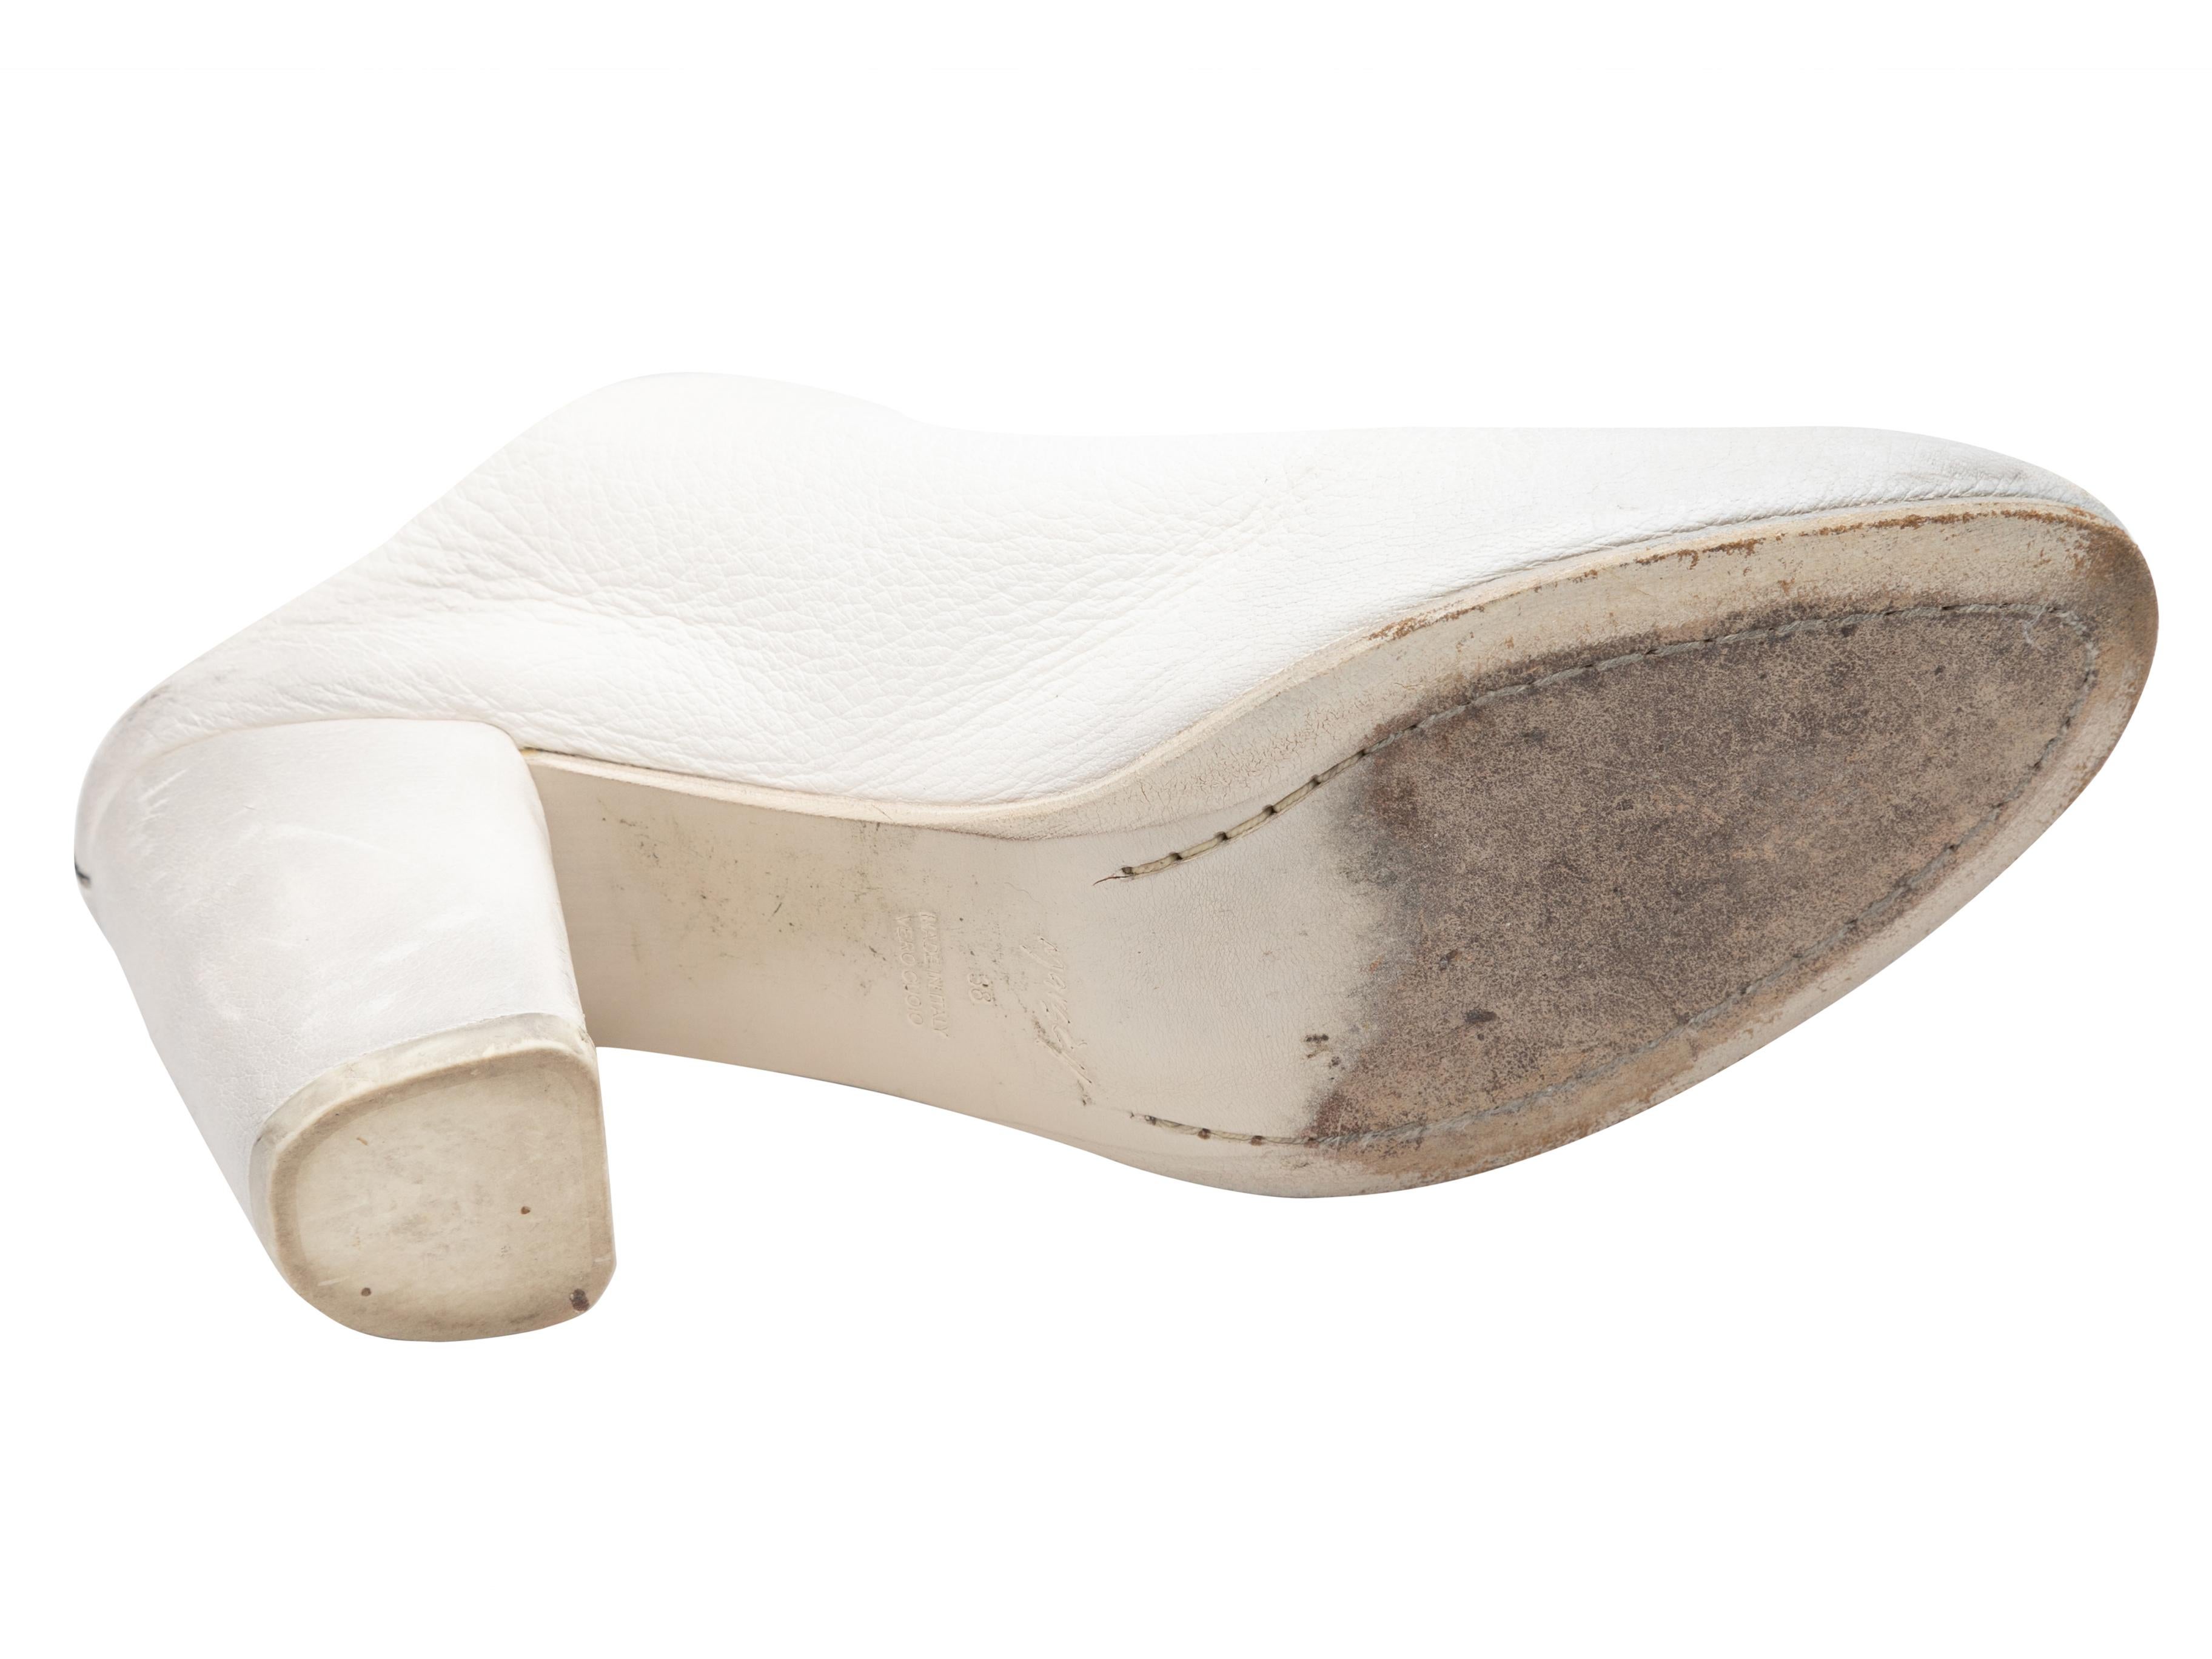 White leather heeled mules by Marsell. Block heels. 3